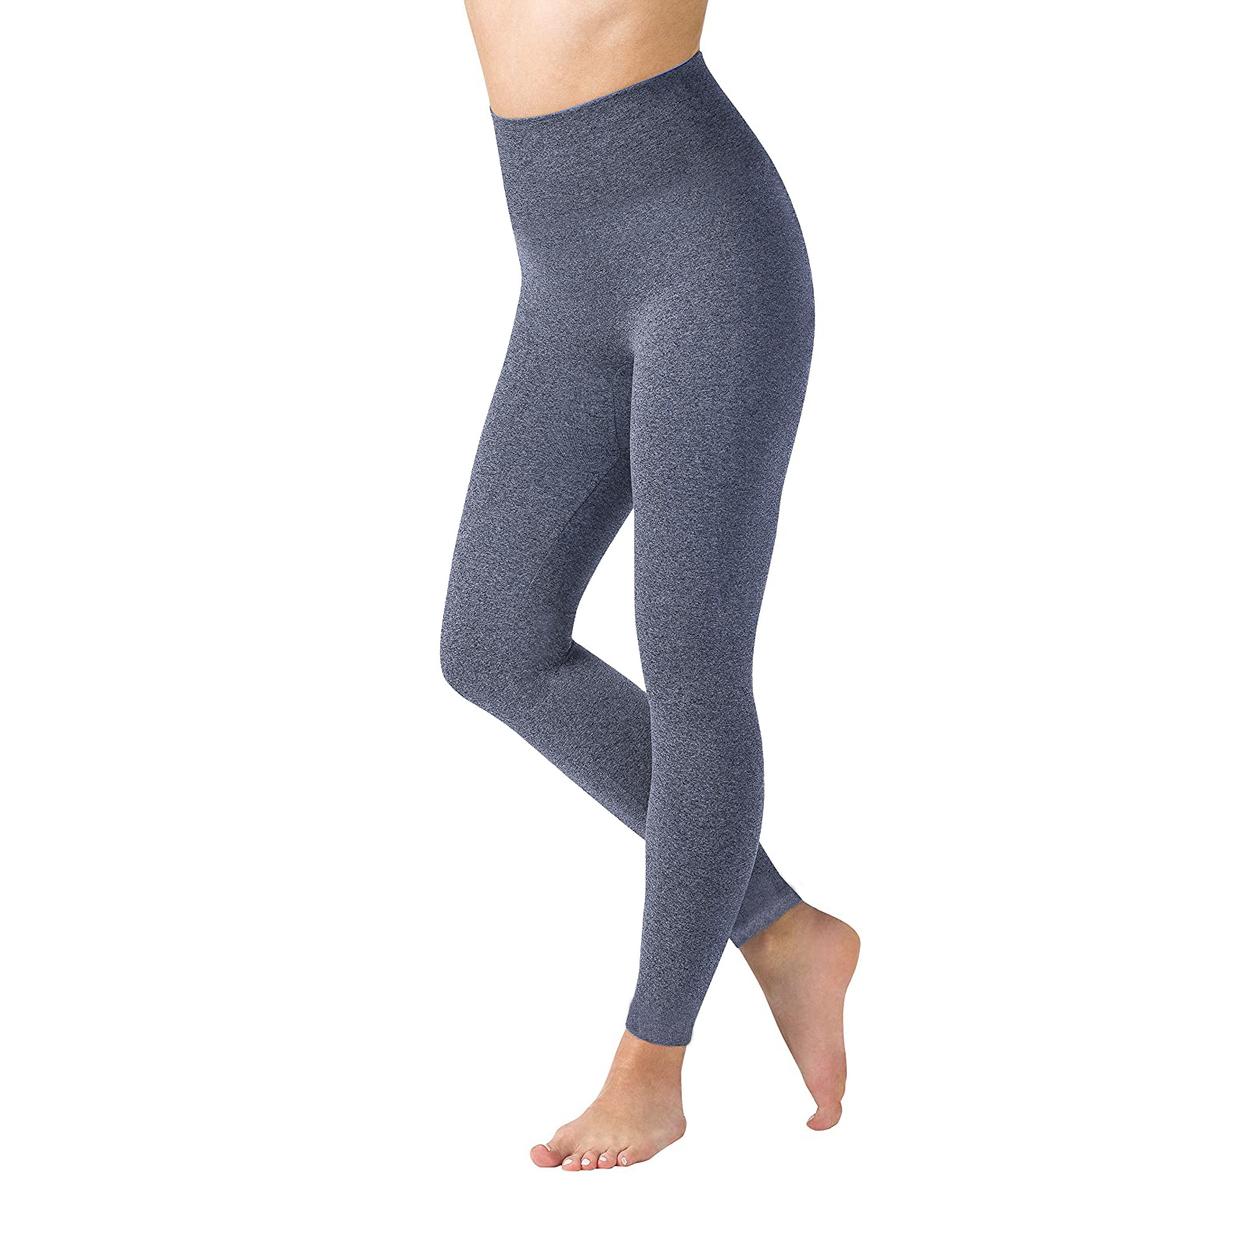 Women's High Waisted Ultra-Soft Fleece Lined Warm Marled Leggings(Available In Plus Sizes) - Navy, Large